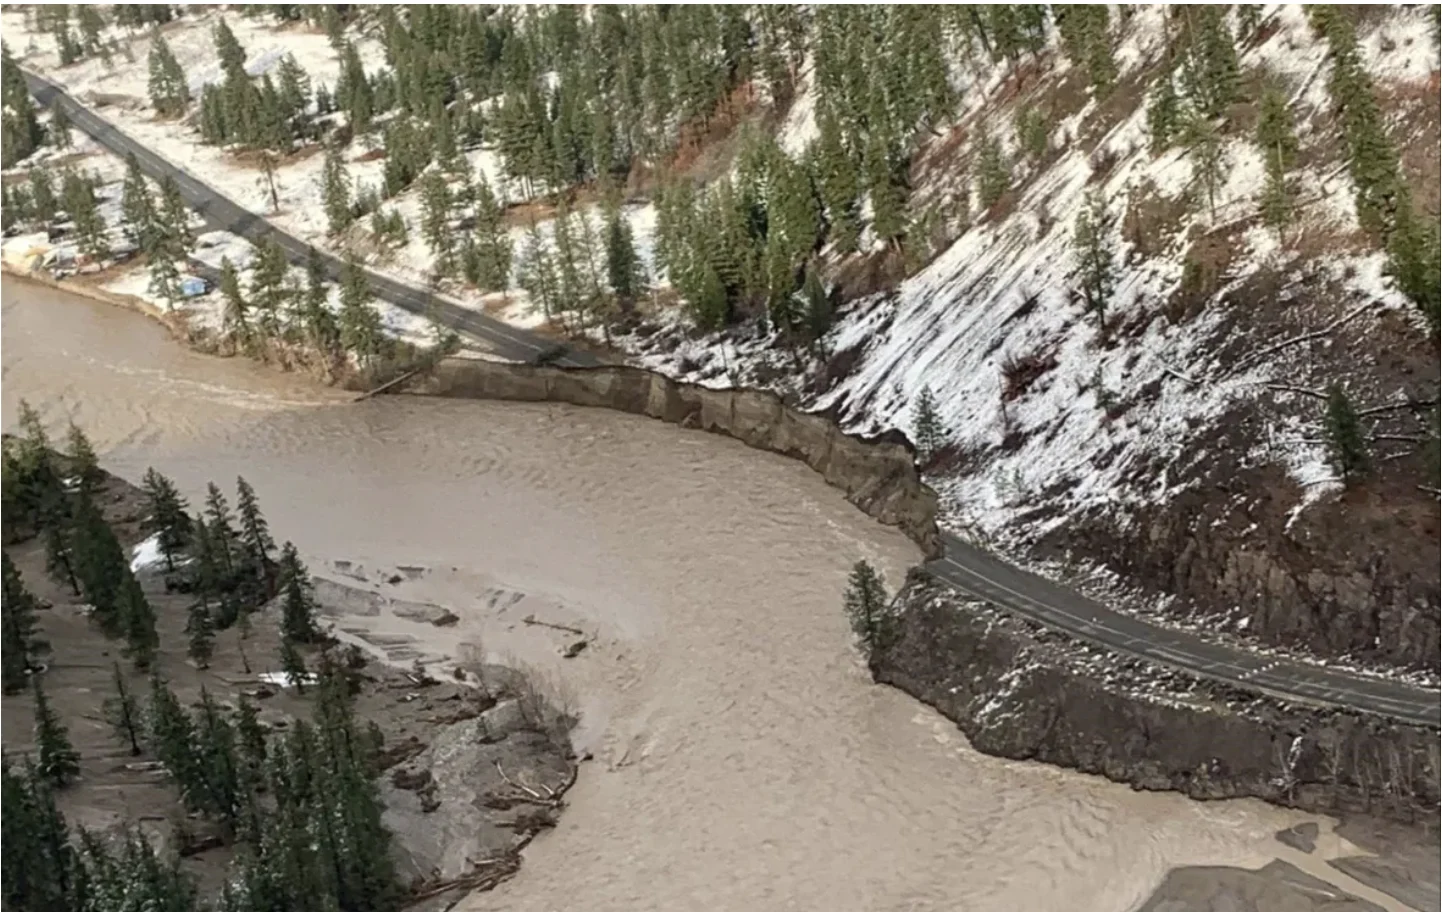 B.C. Ministry of Transportation: Flooding took out large portions of Highway 8 west of Merritt, B.C. (B.C. Ministry of Transportation)